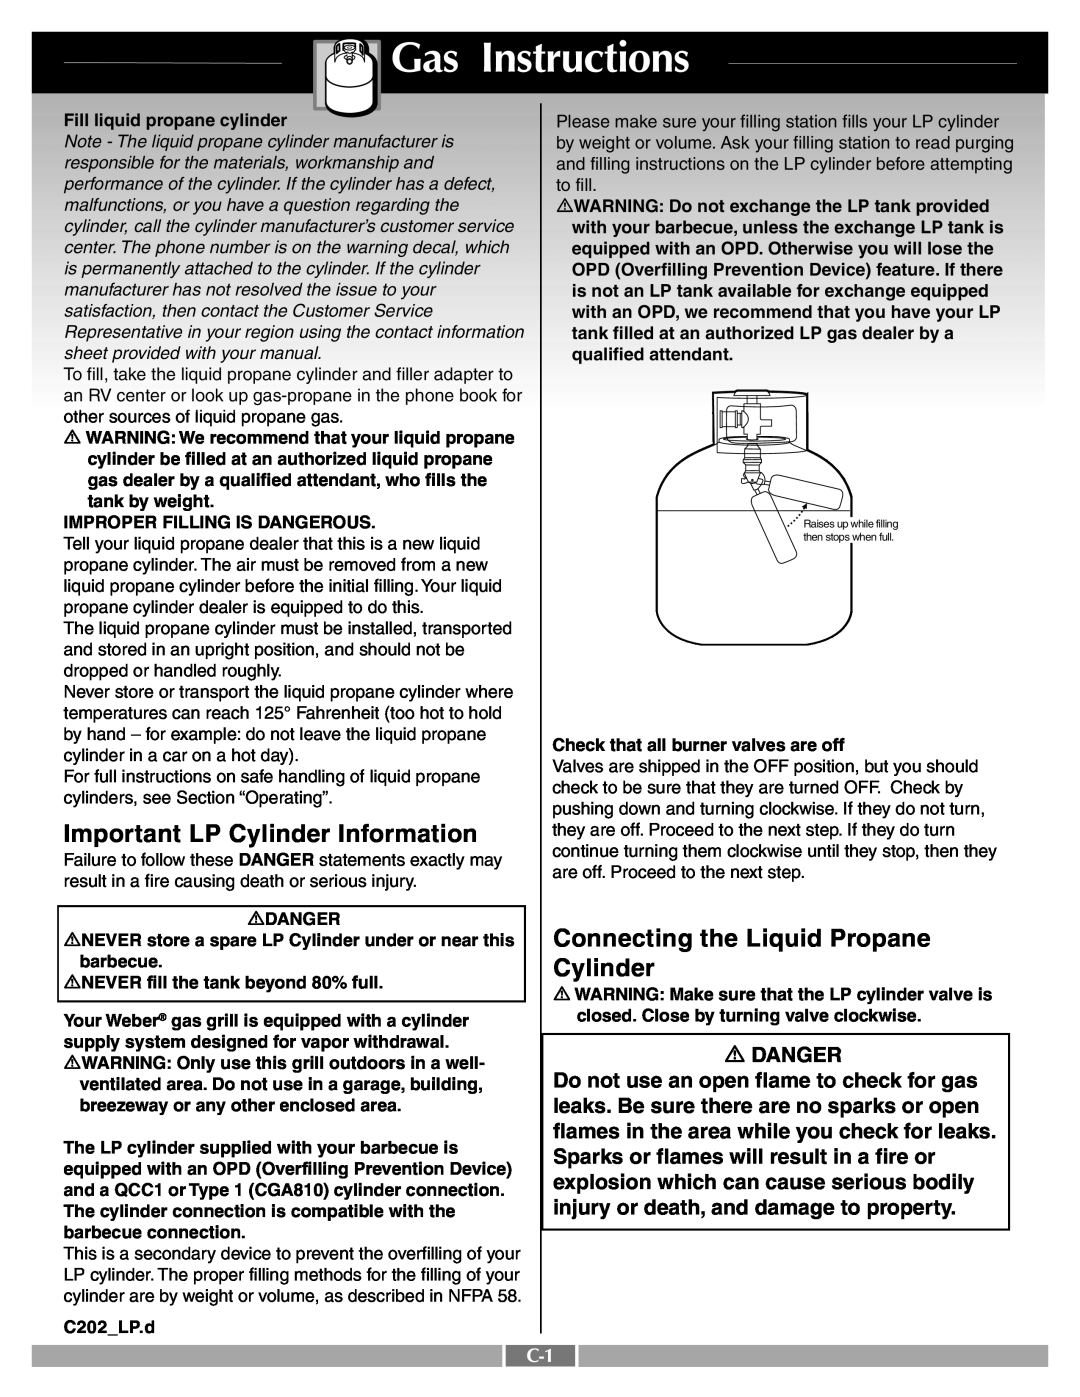 Weber 55249 manual Gas Instructions, Important LP Cylinder Information, Connecting the Liquid Propane, Danger 